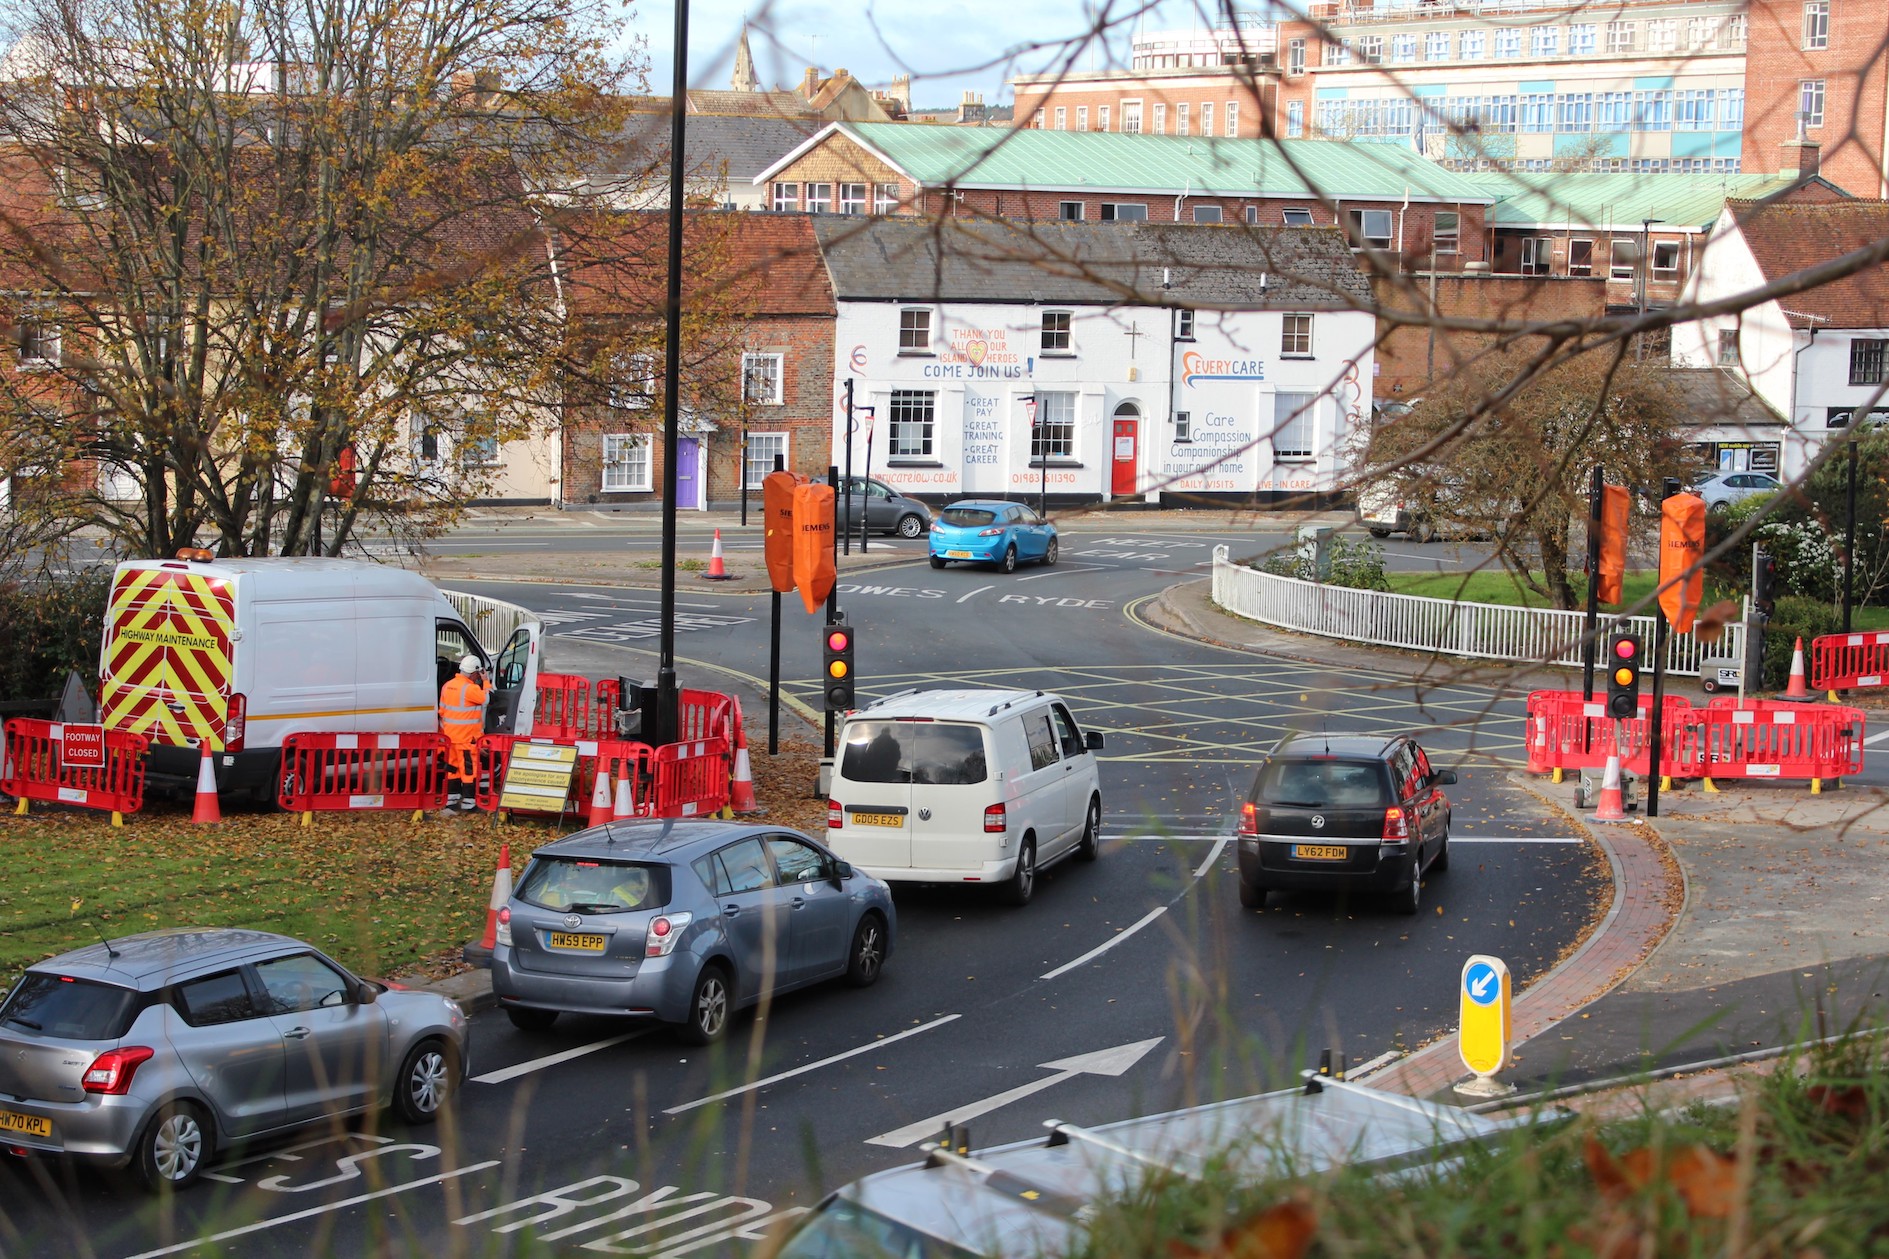 cars queuing at roundabout junction with workmen, red and white traffic barriers and signs indicating work taking place on lights. Traffic lights covered over with hoods and temporary lights in place. Buildings and trees in the background.